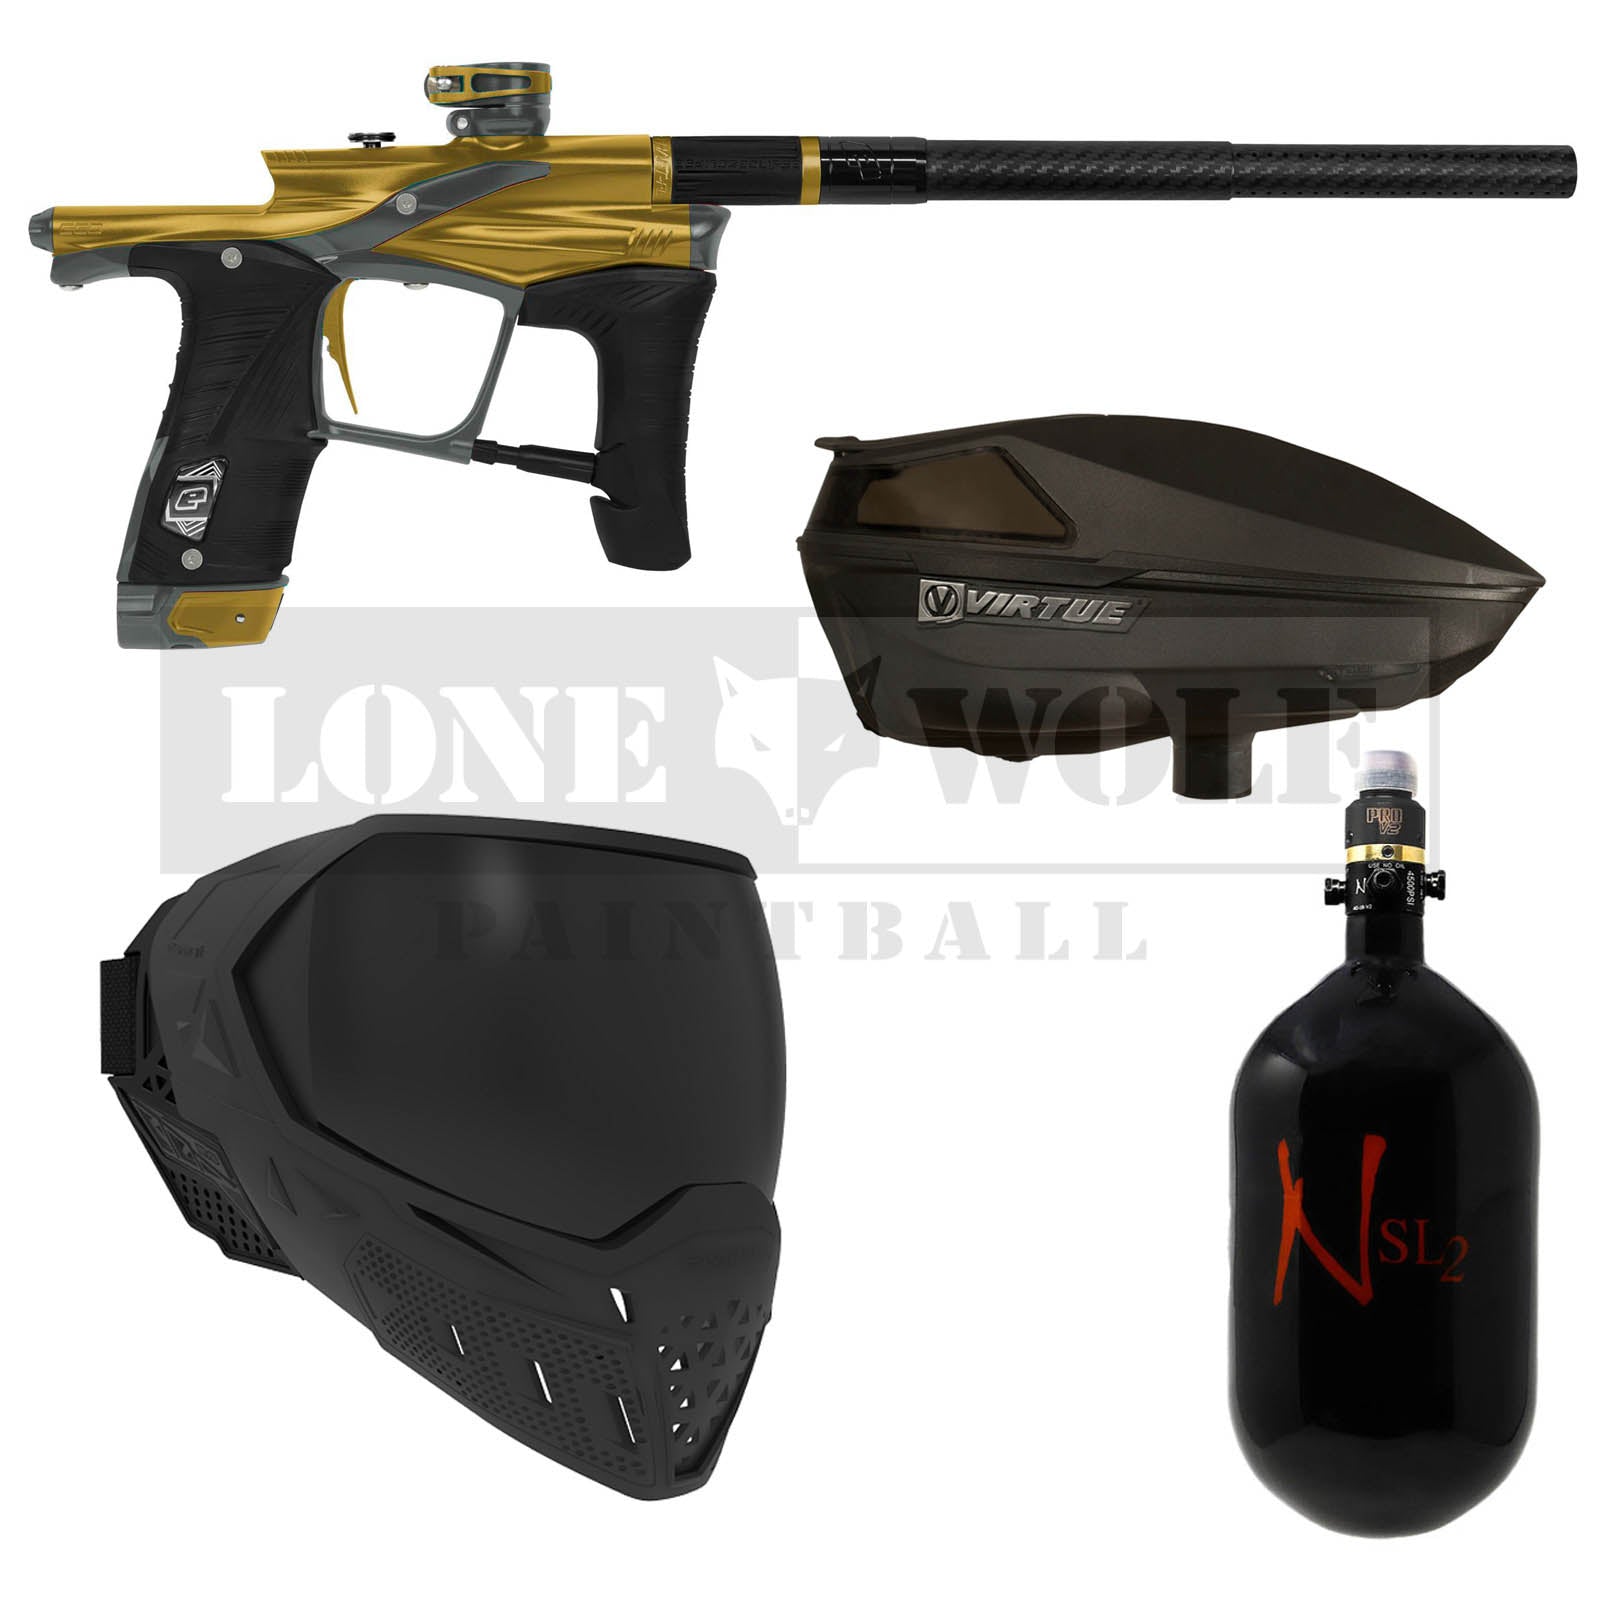 Introducing the Ego LV 1.6 at Paintball Extravaganza - watch the new  shooting video!